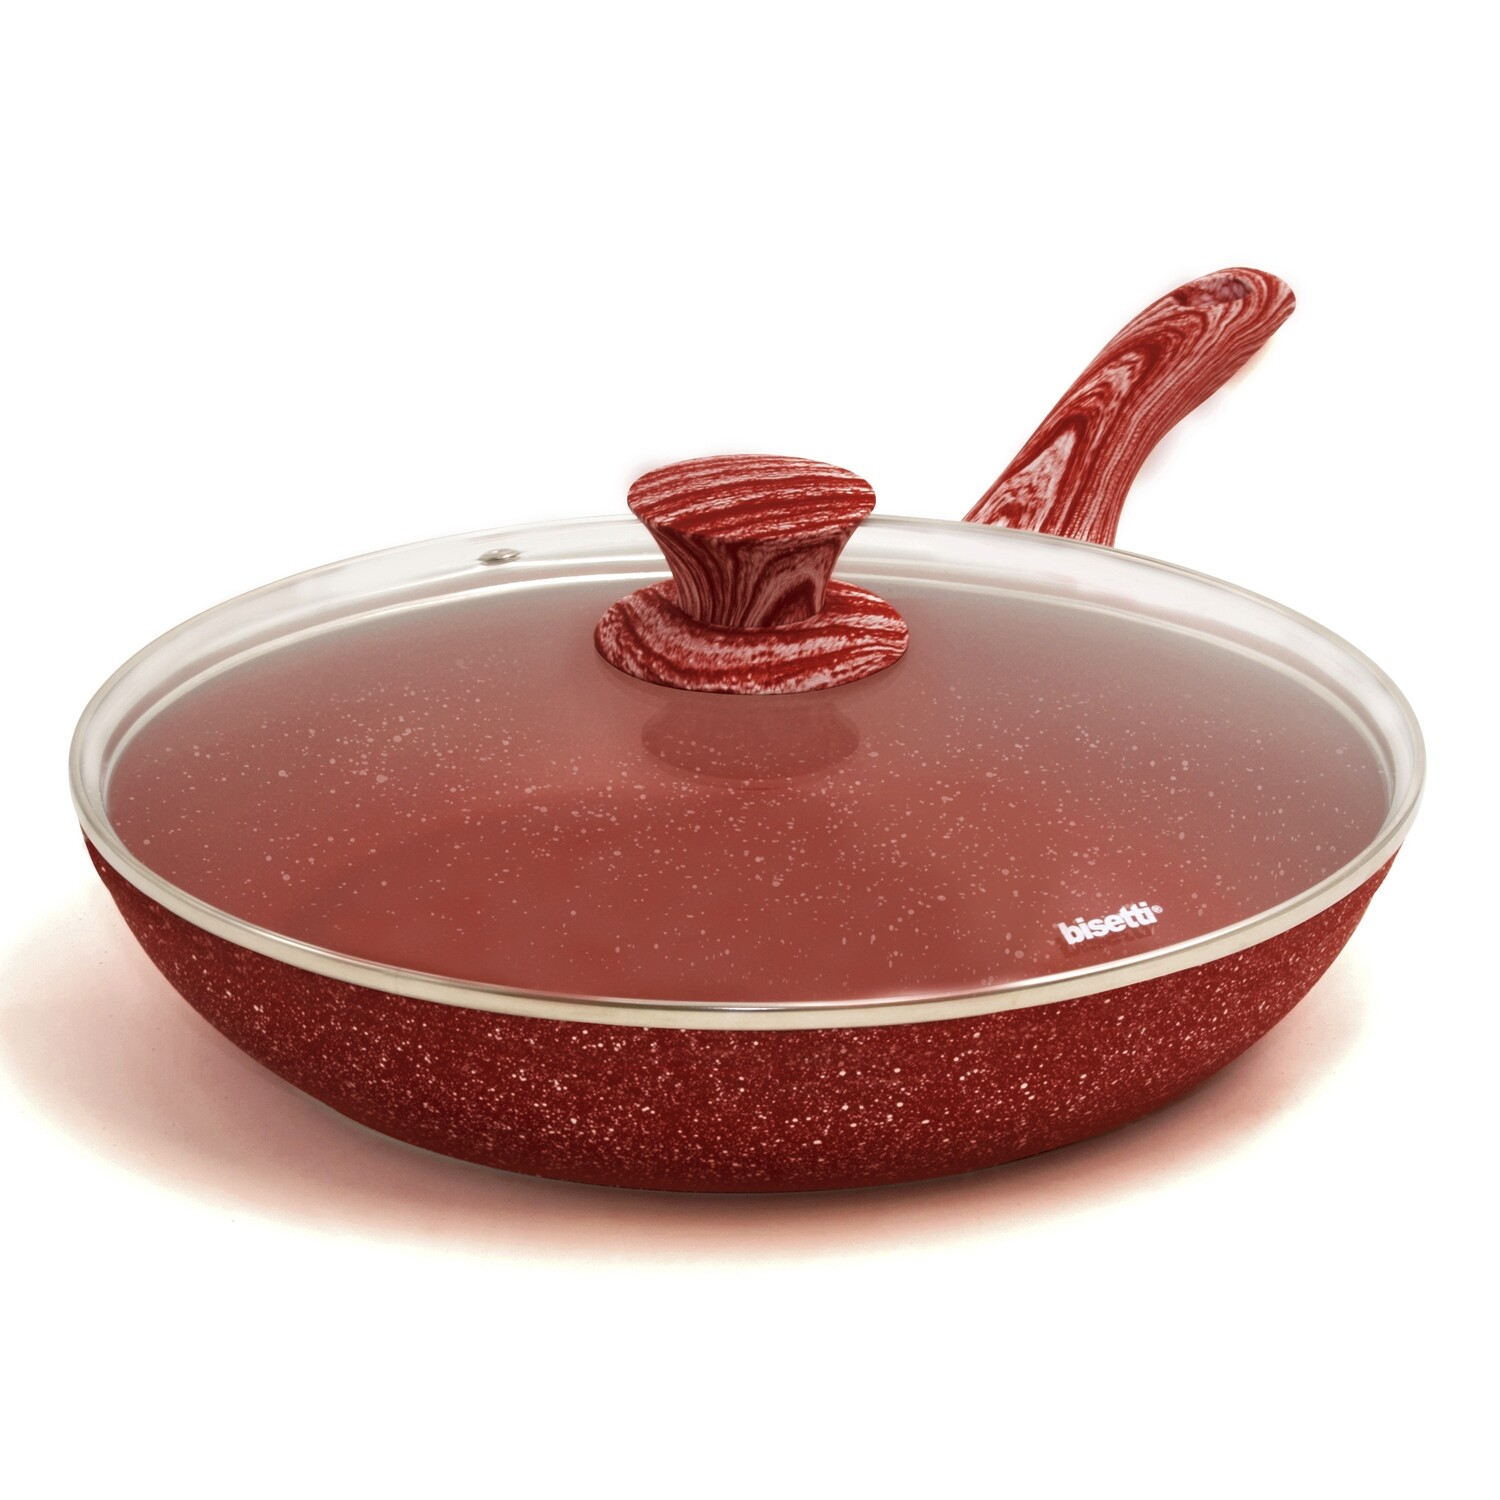 Pan Ø 28 cm 'Red Passion' with wood colour handles and lid